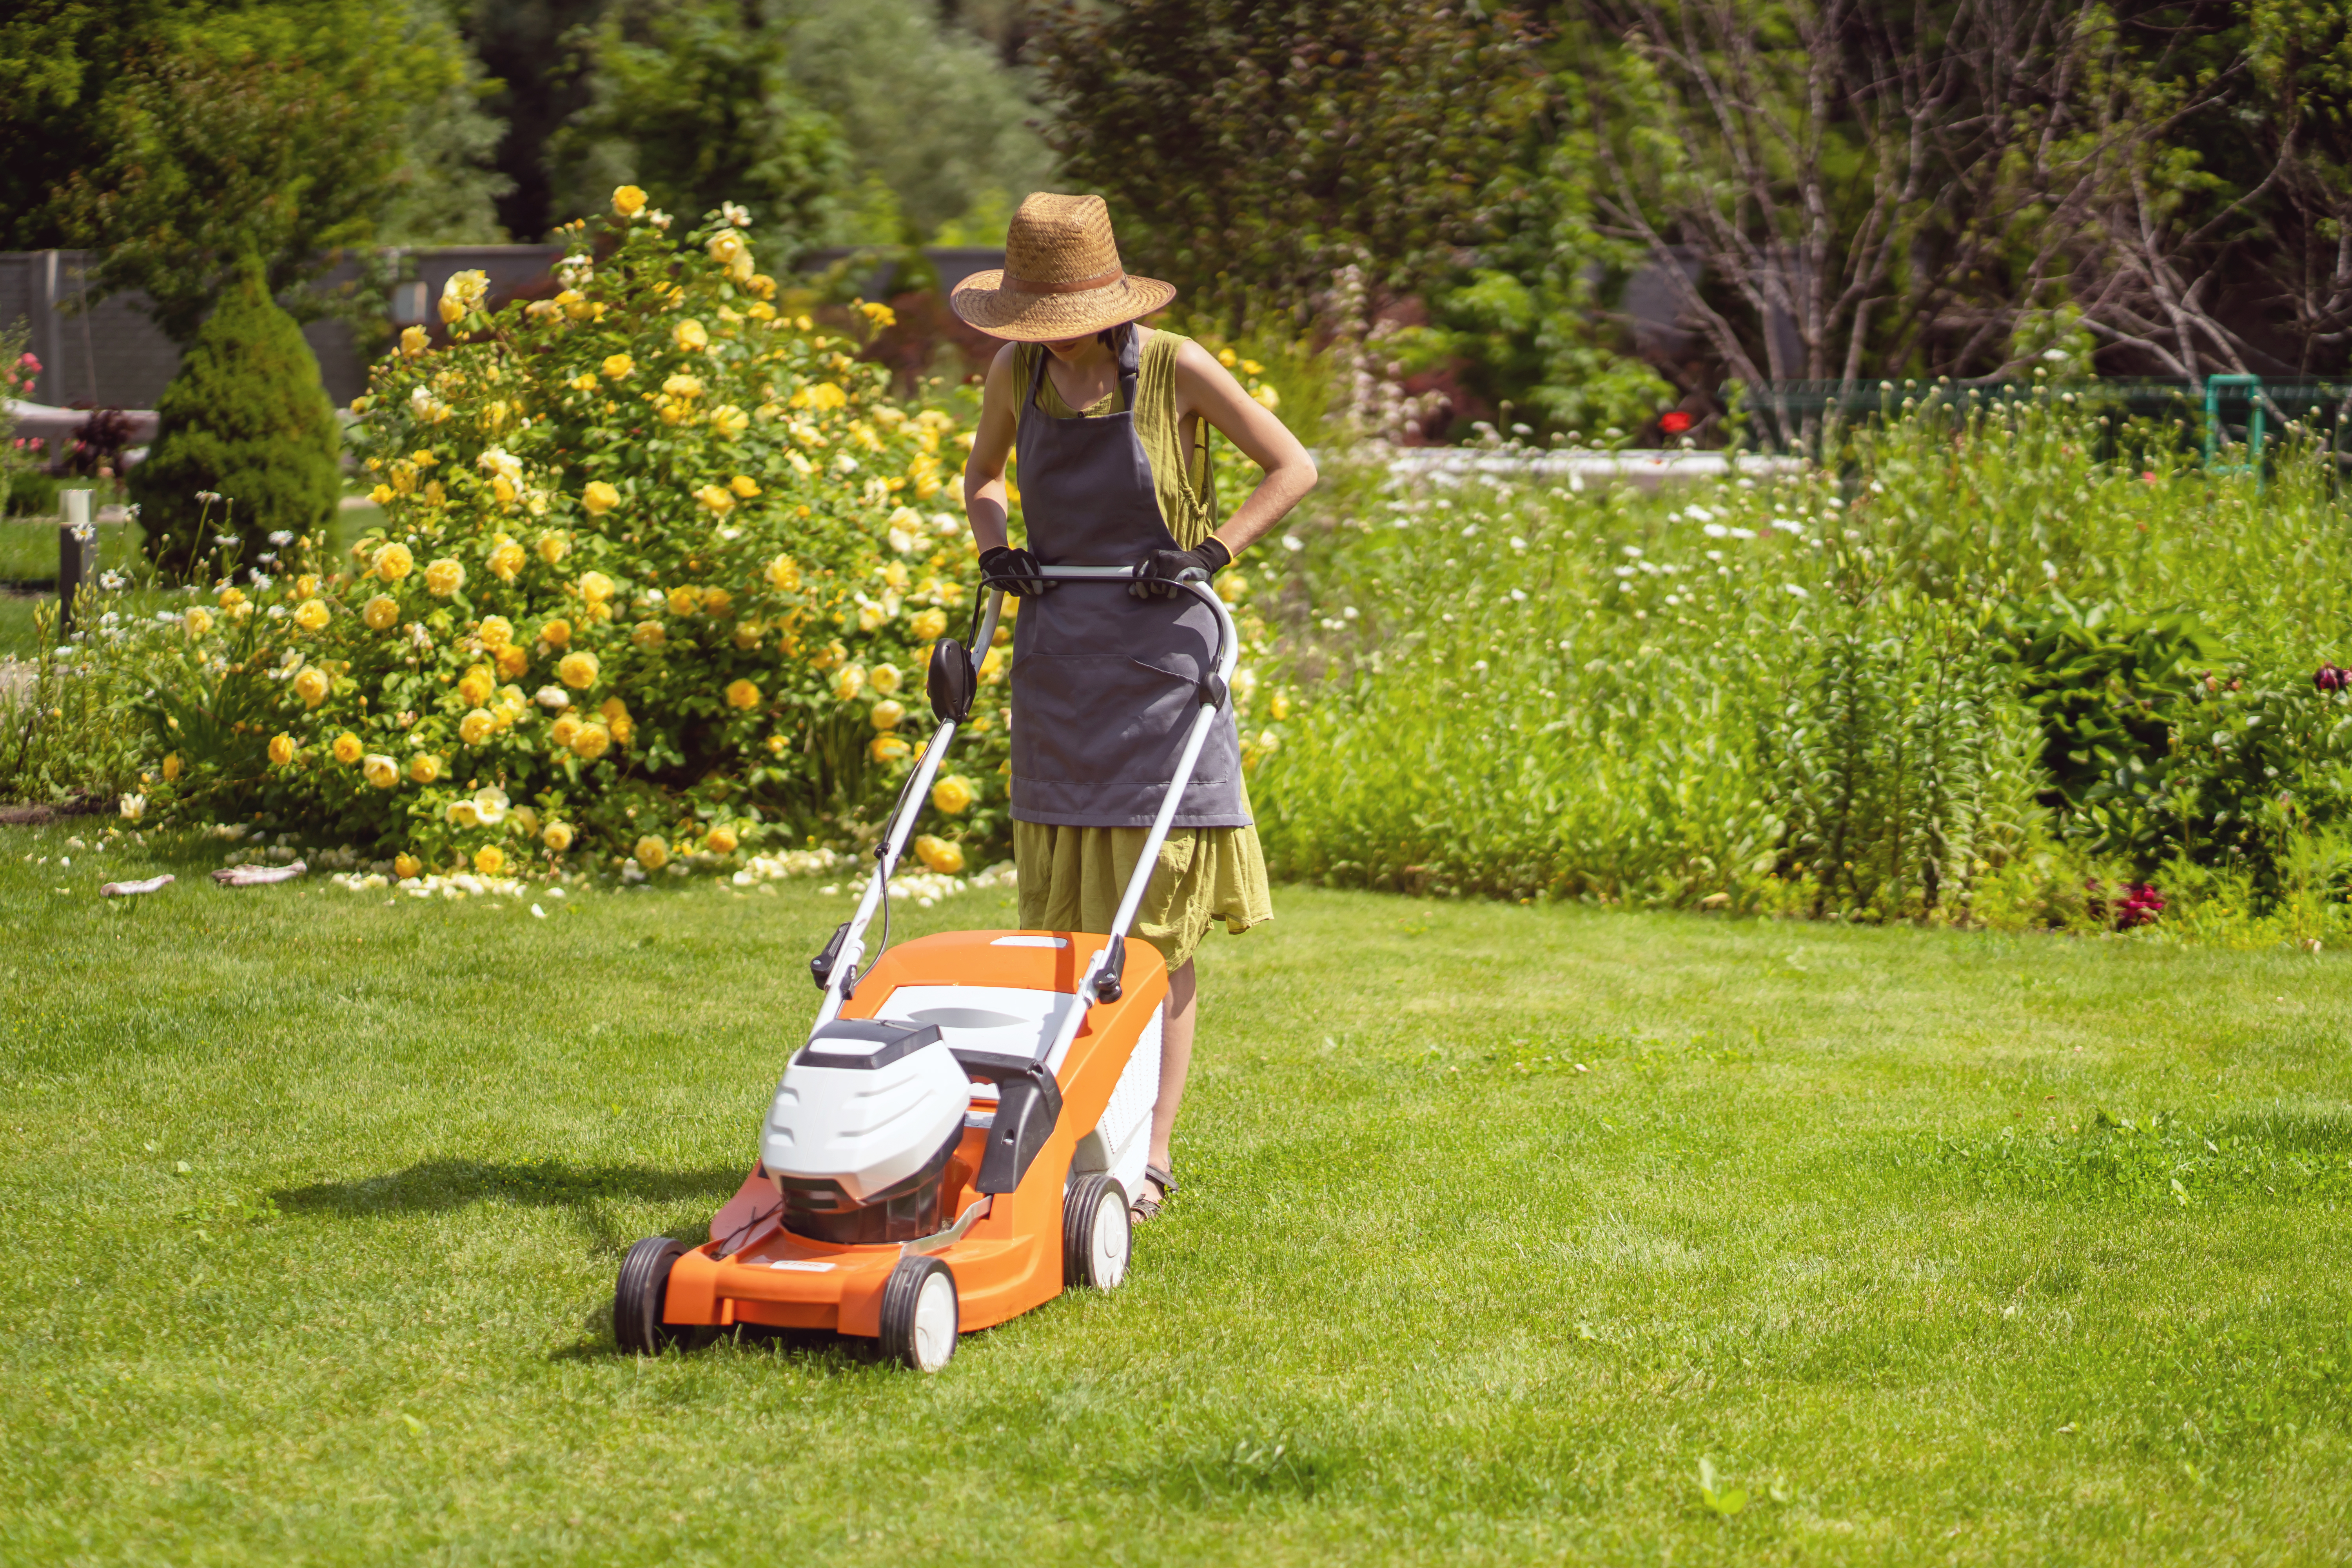 A young girl in a straw hat is mowing a lawn in the backyard with an orange lawn mower. A woman gardener is trimming grass with the grass cutter. A lawnmower is cutting a lawn on a summer sunny day.